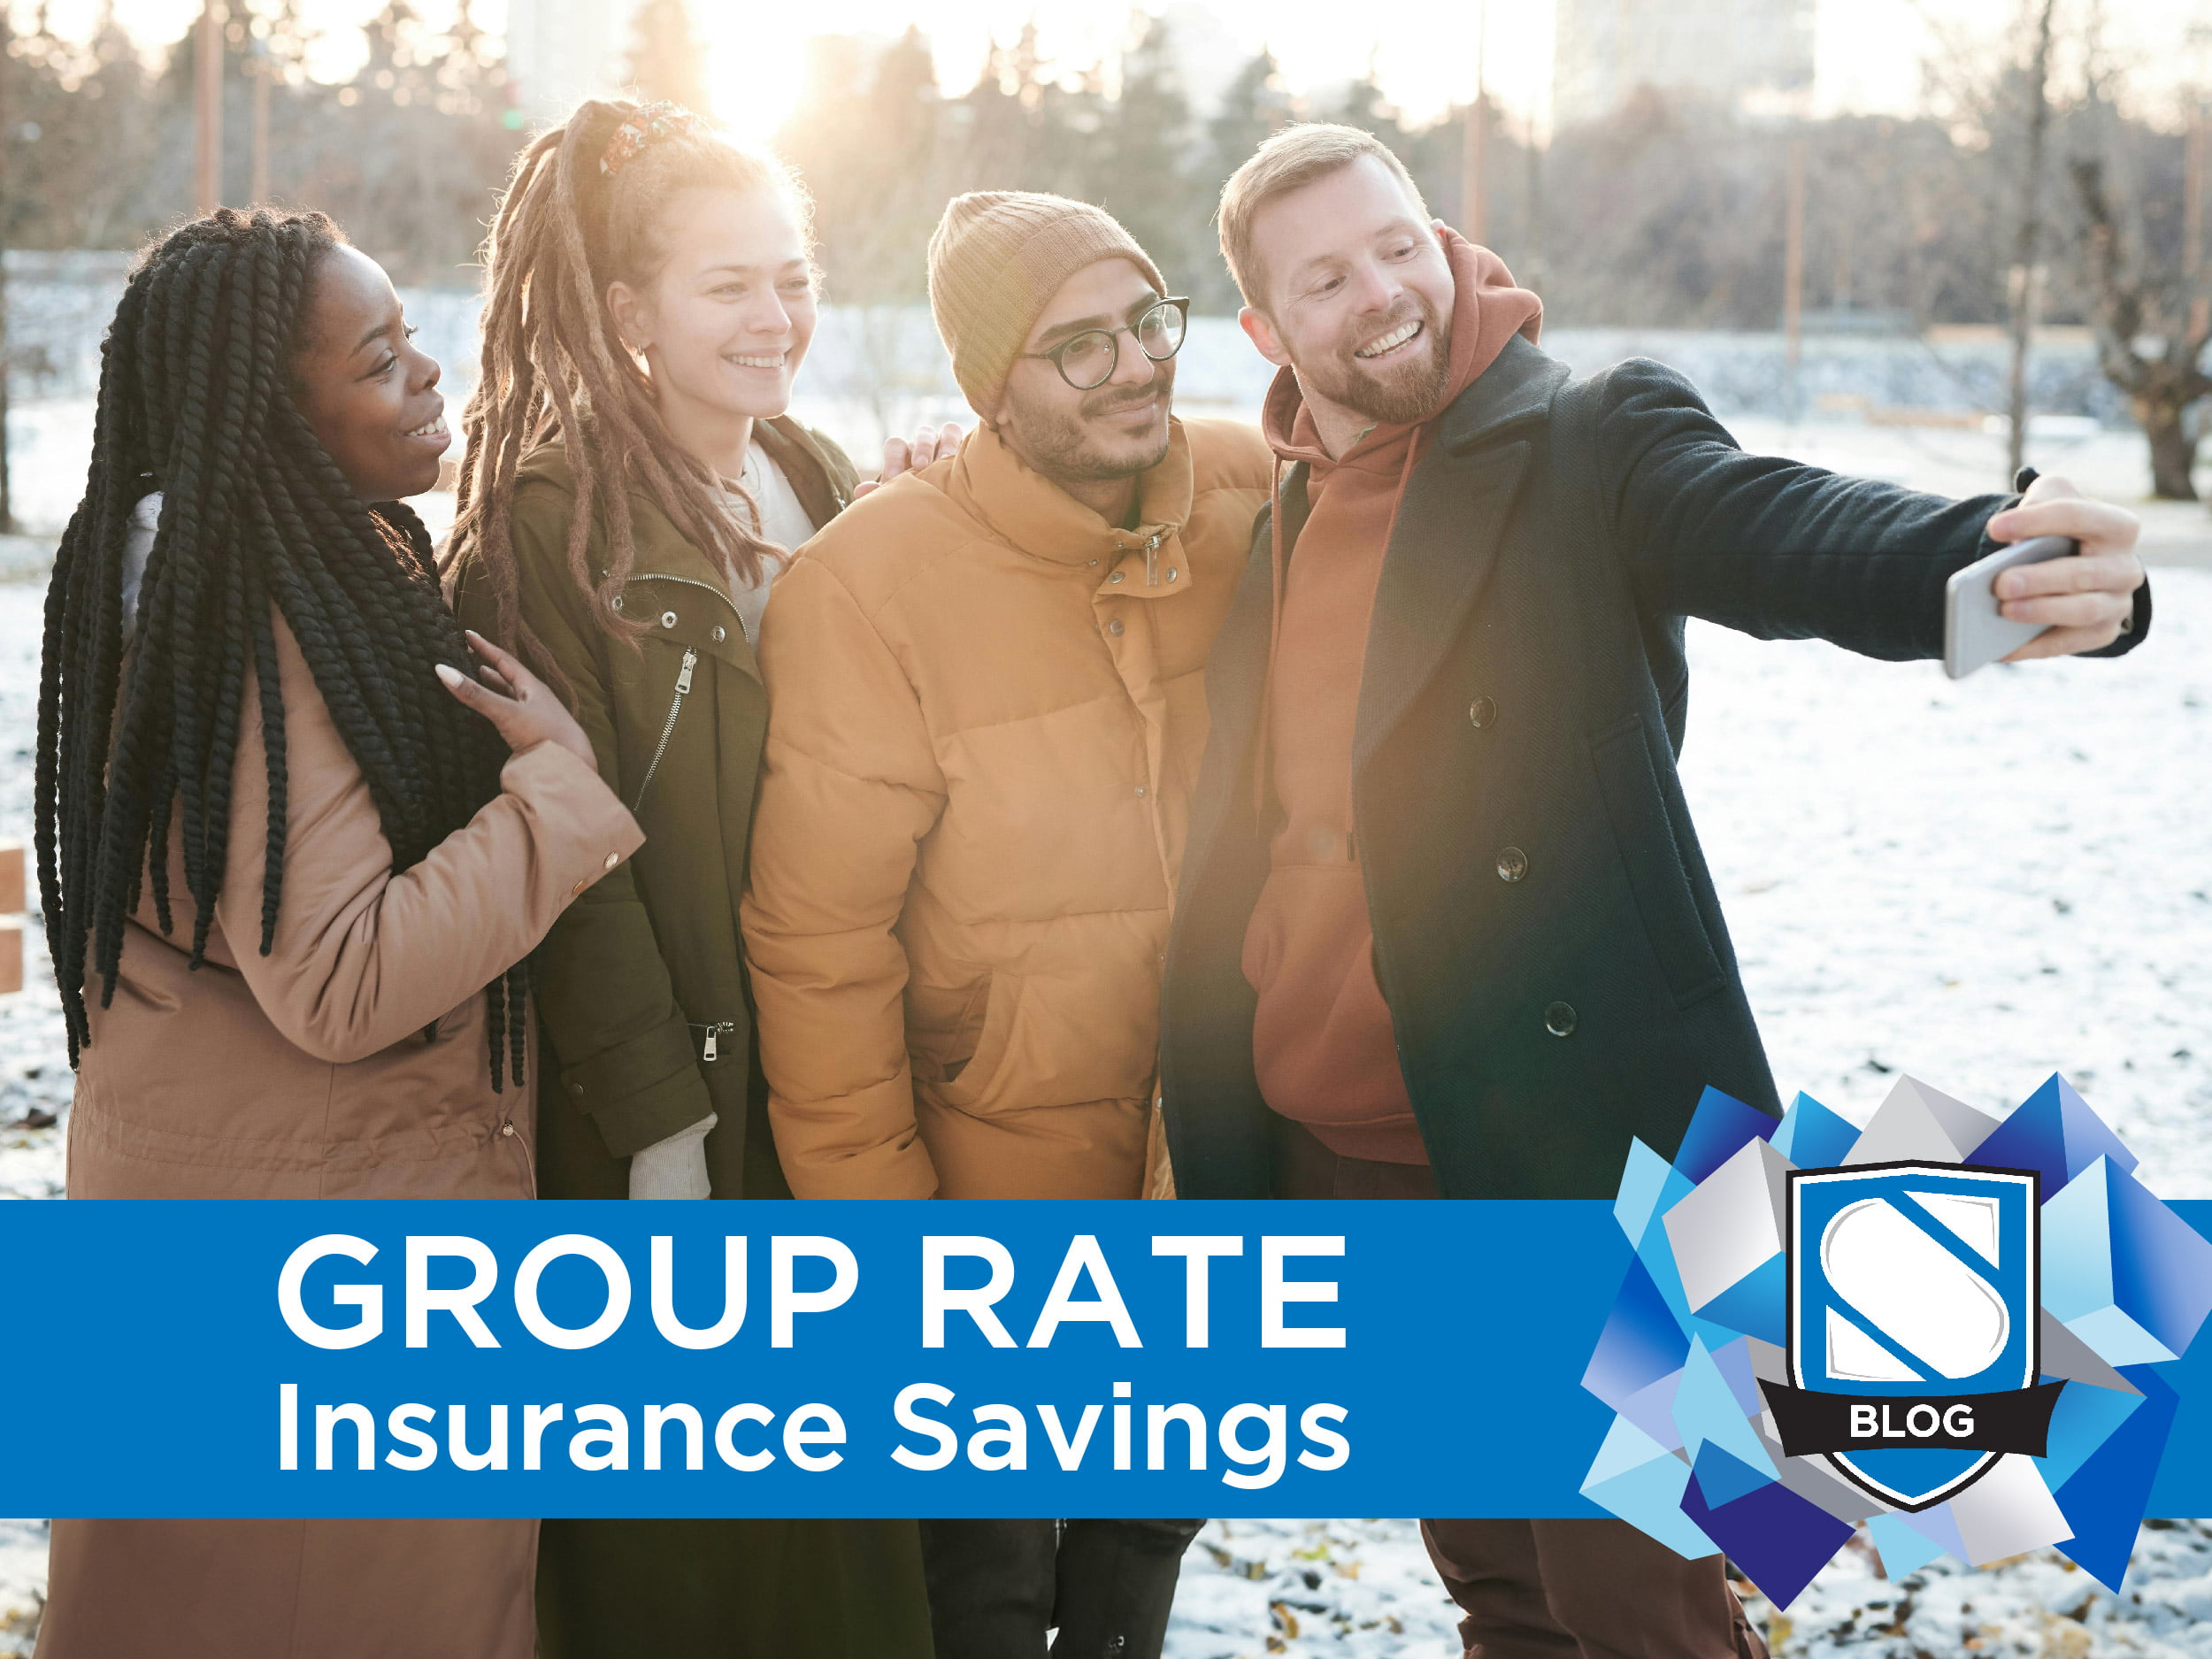 Save Money with our Group Rate Insurance Program